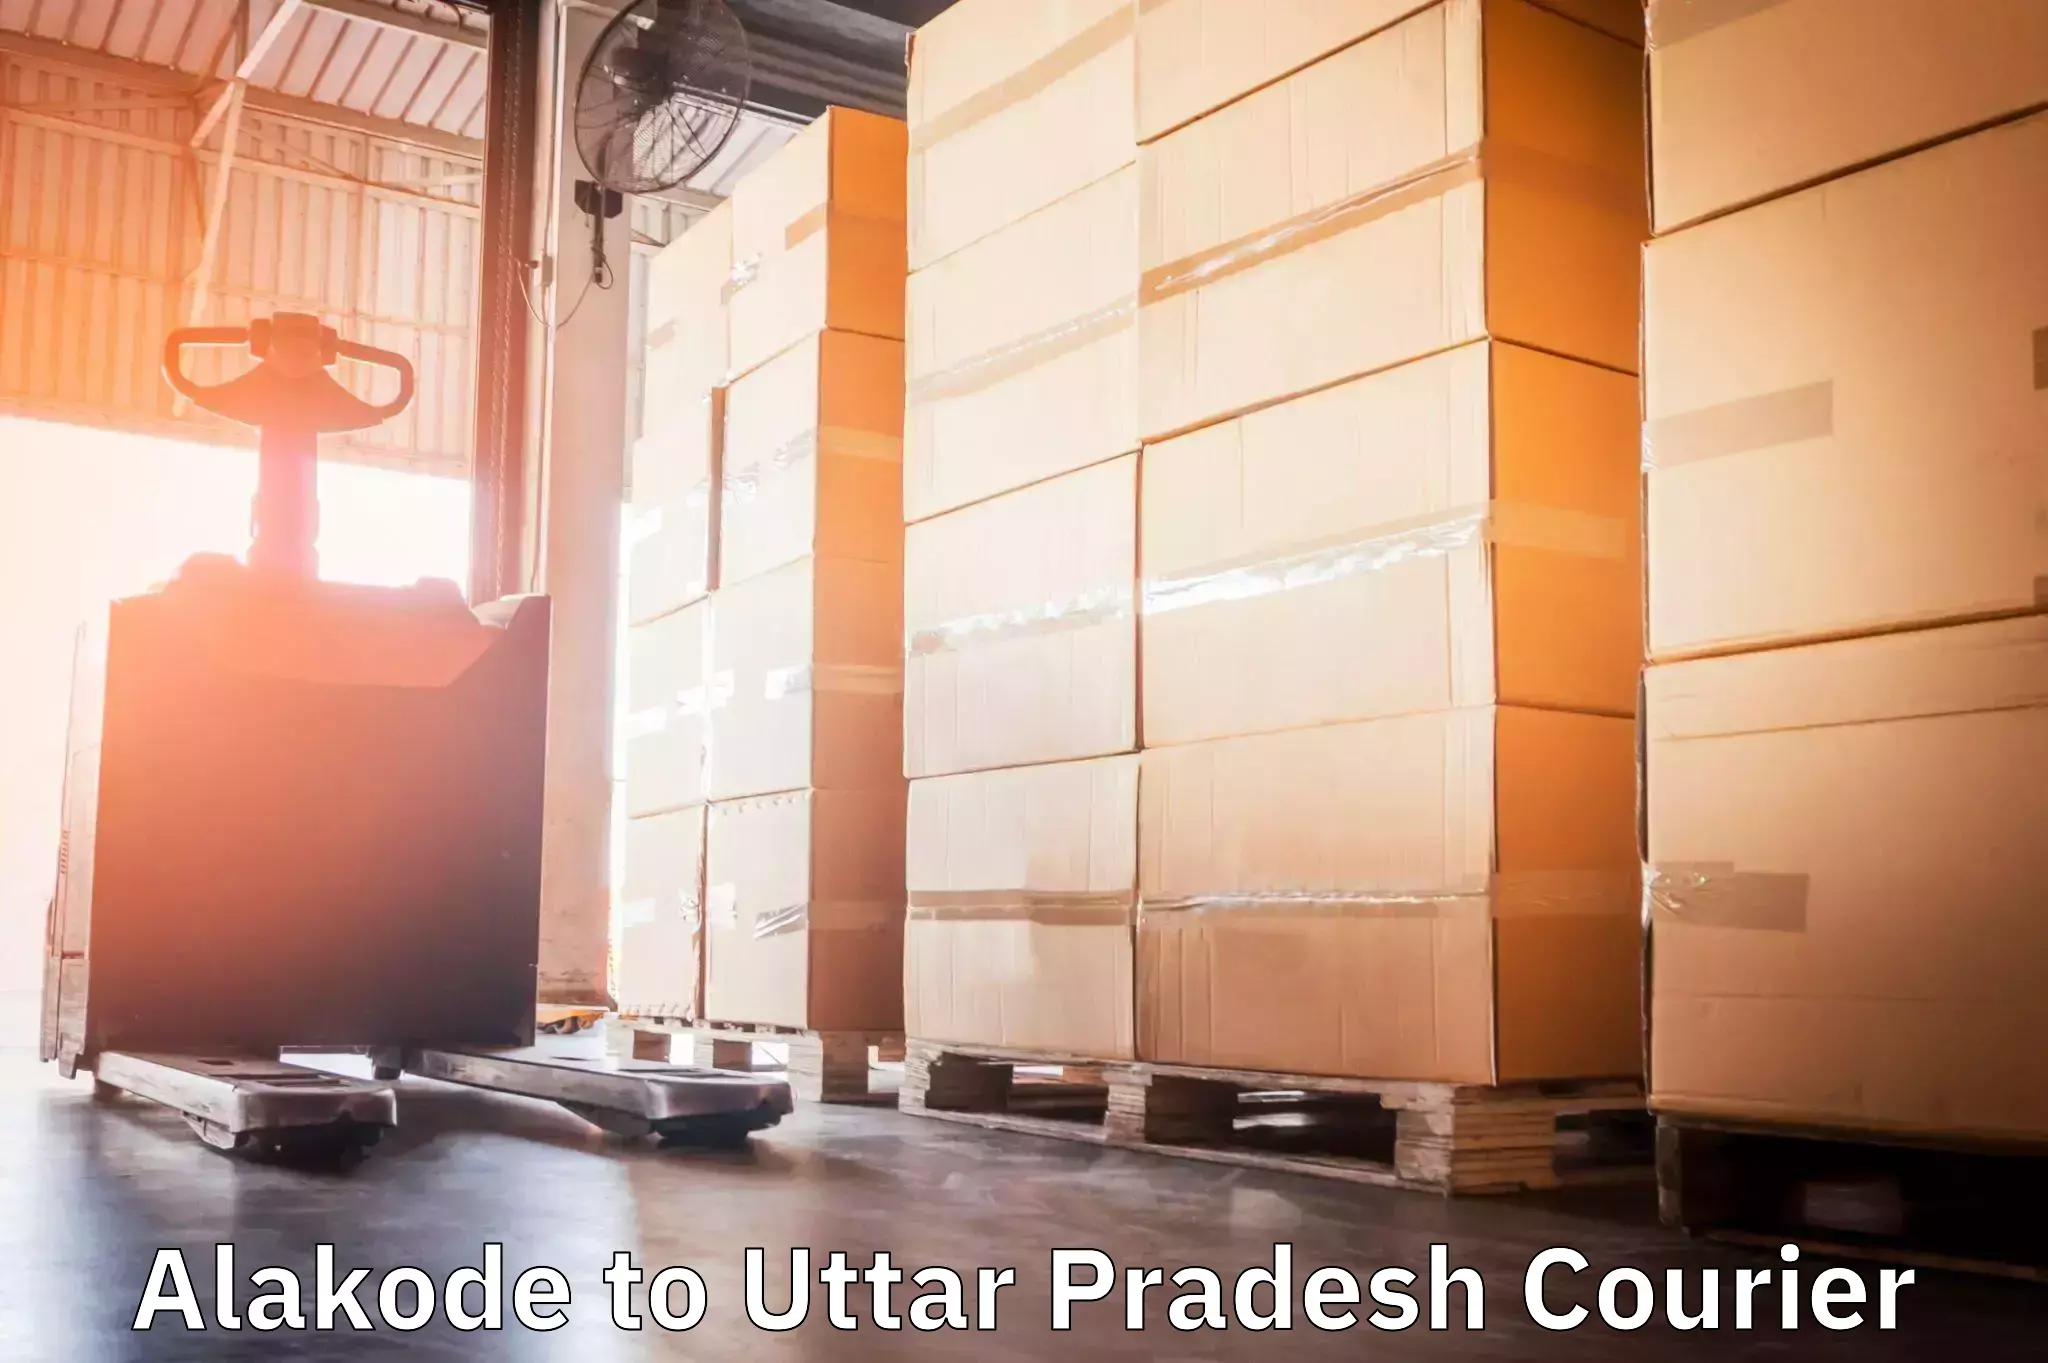 On-call courier service in Alakode to Kannauj